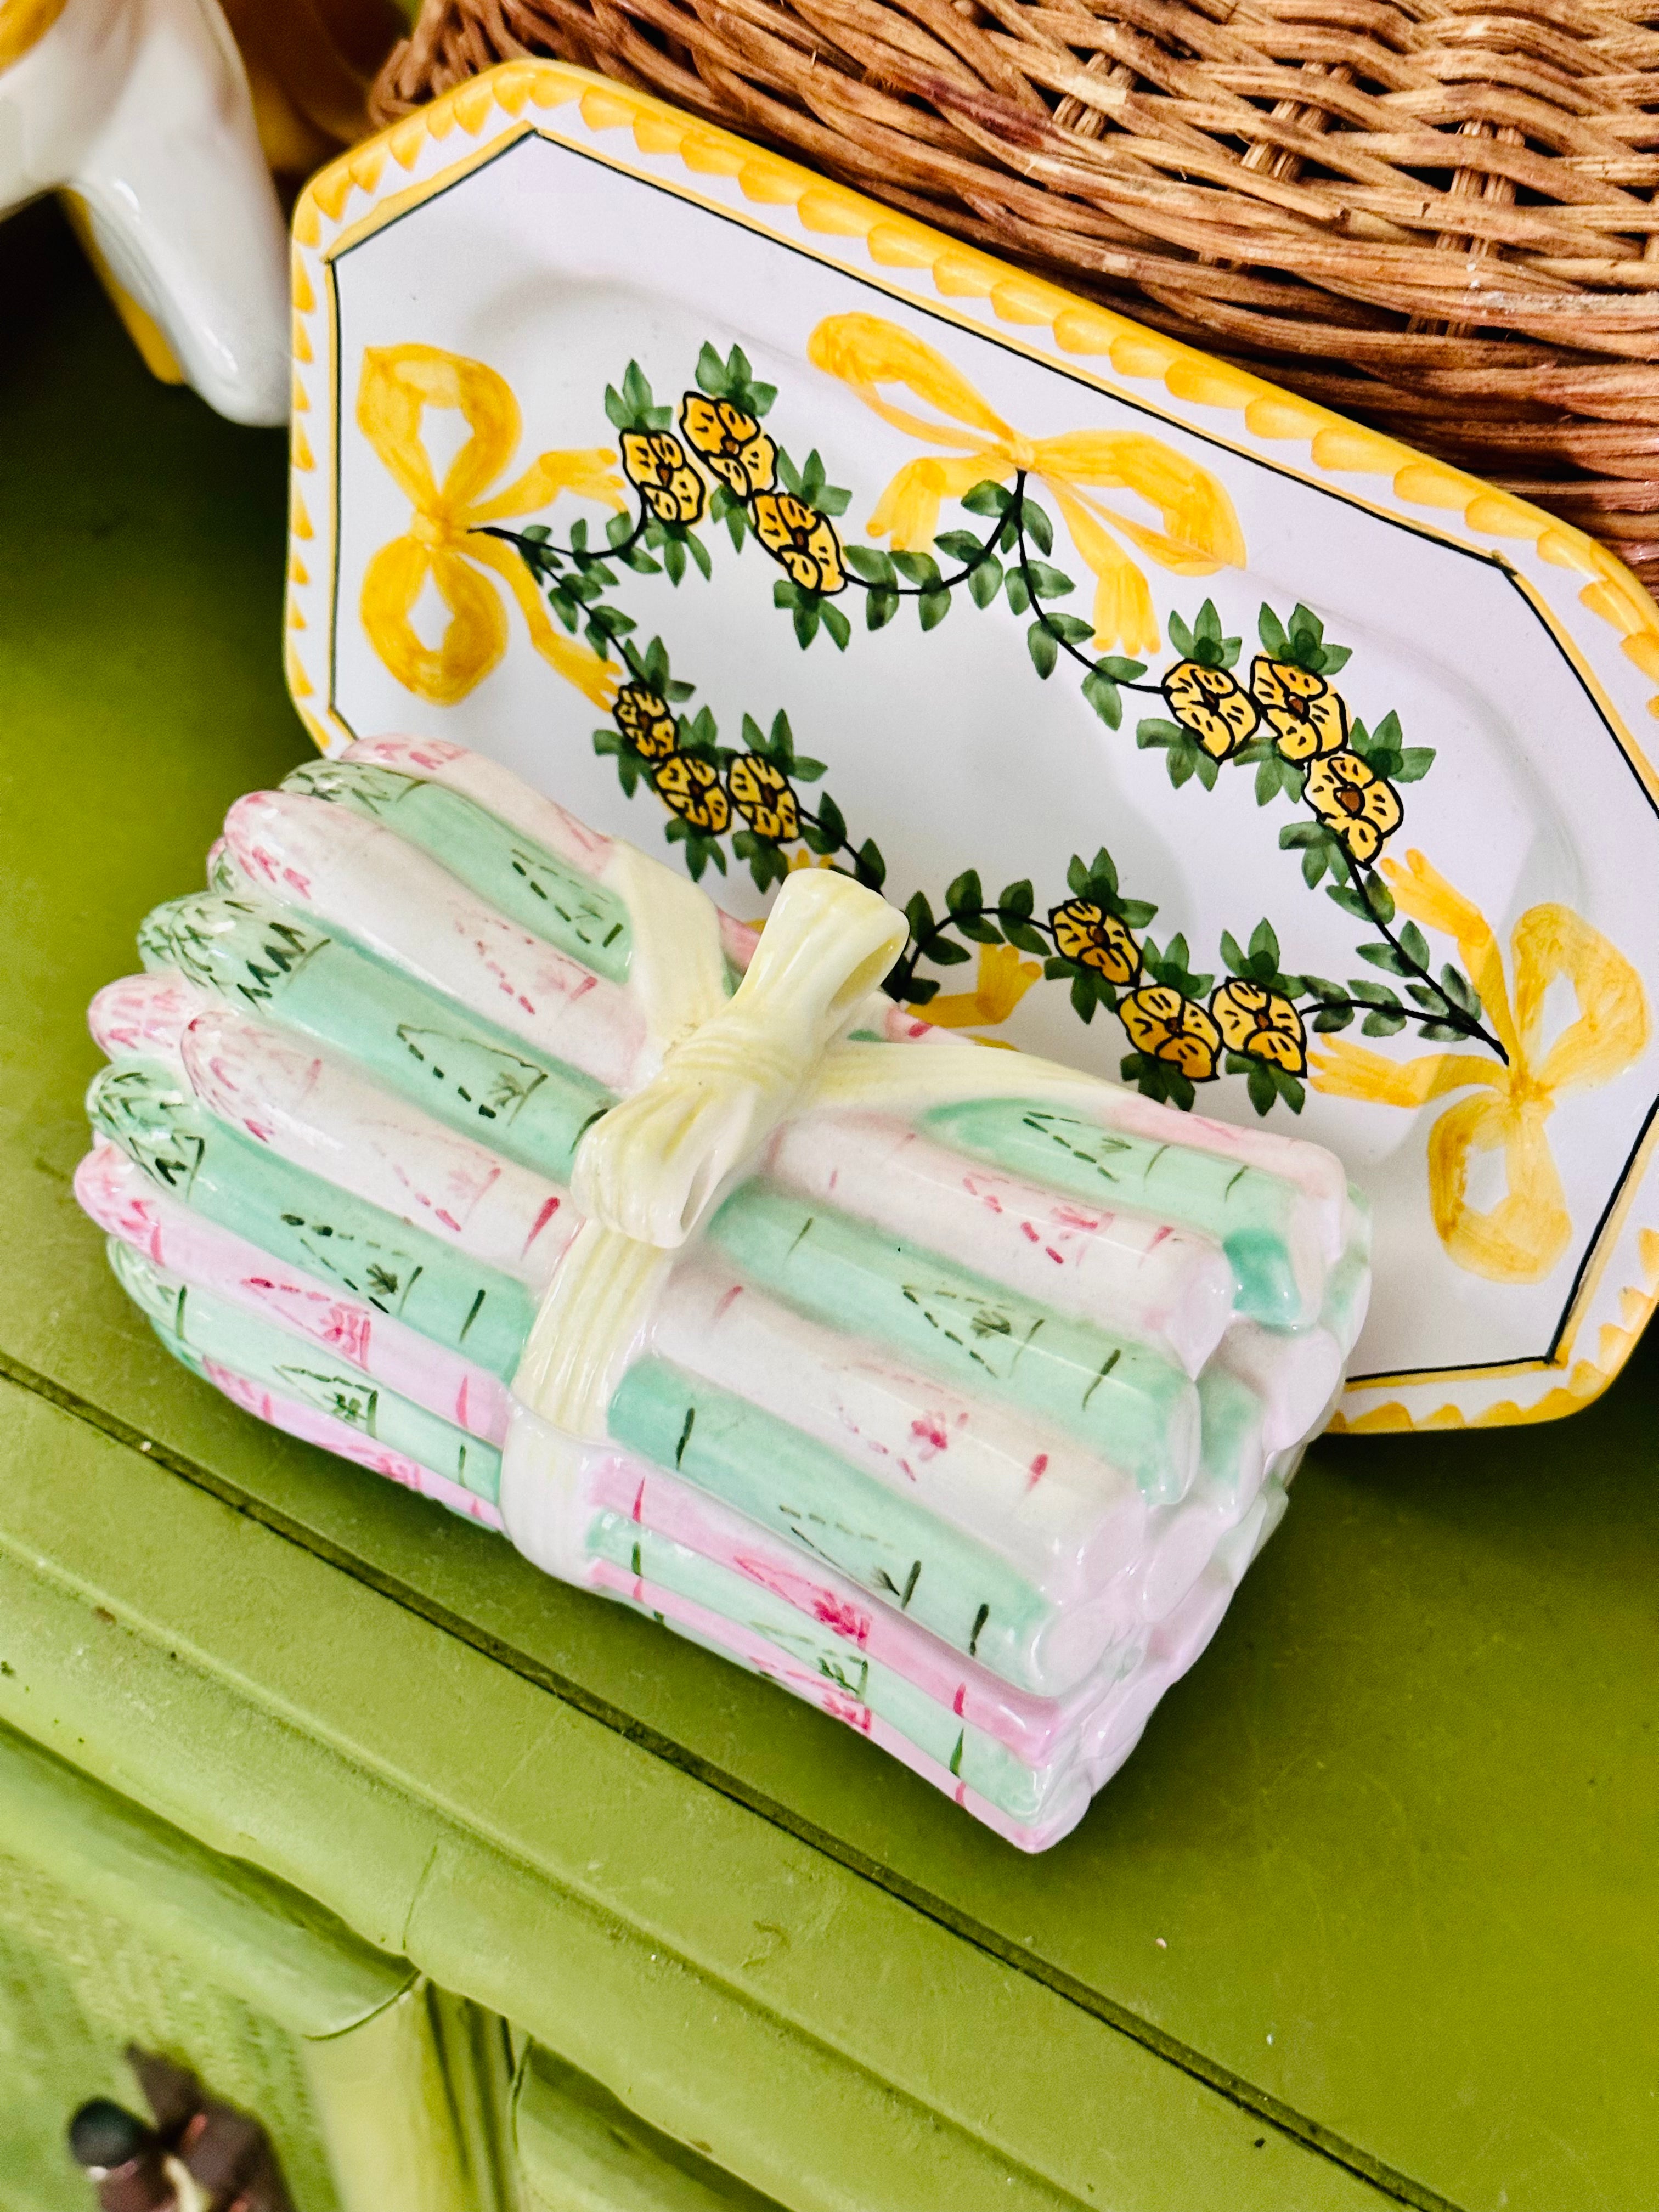 The Most Darling Asparagus Box with Bow